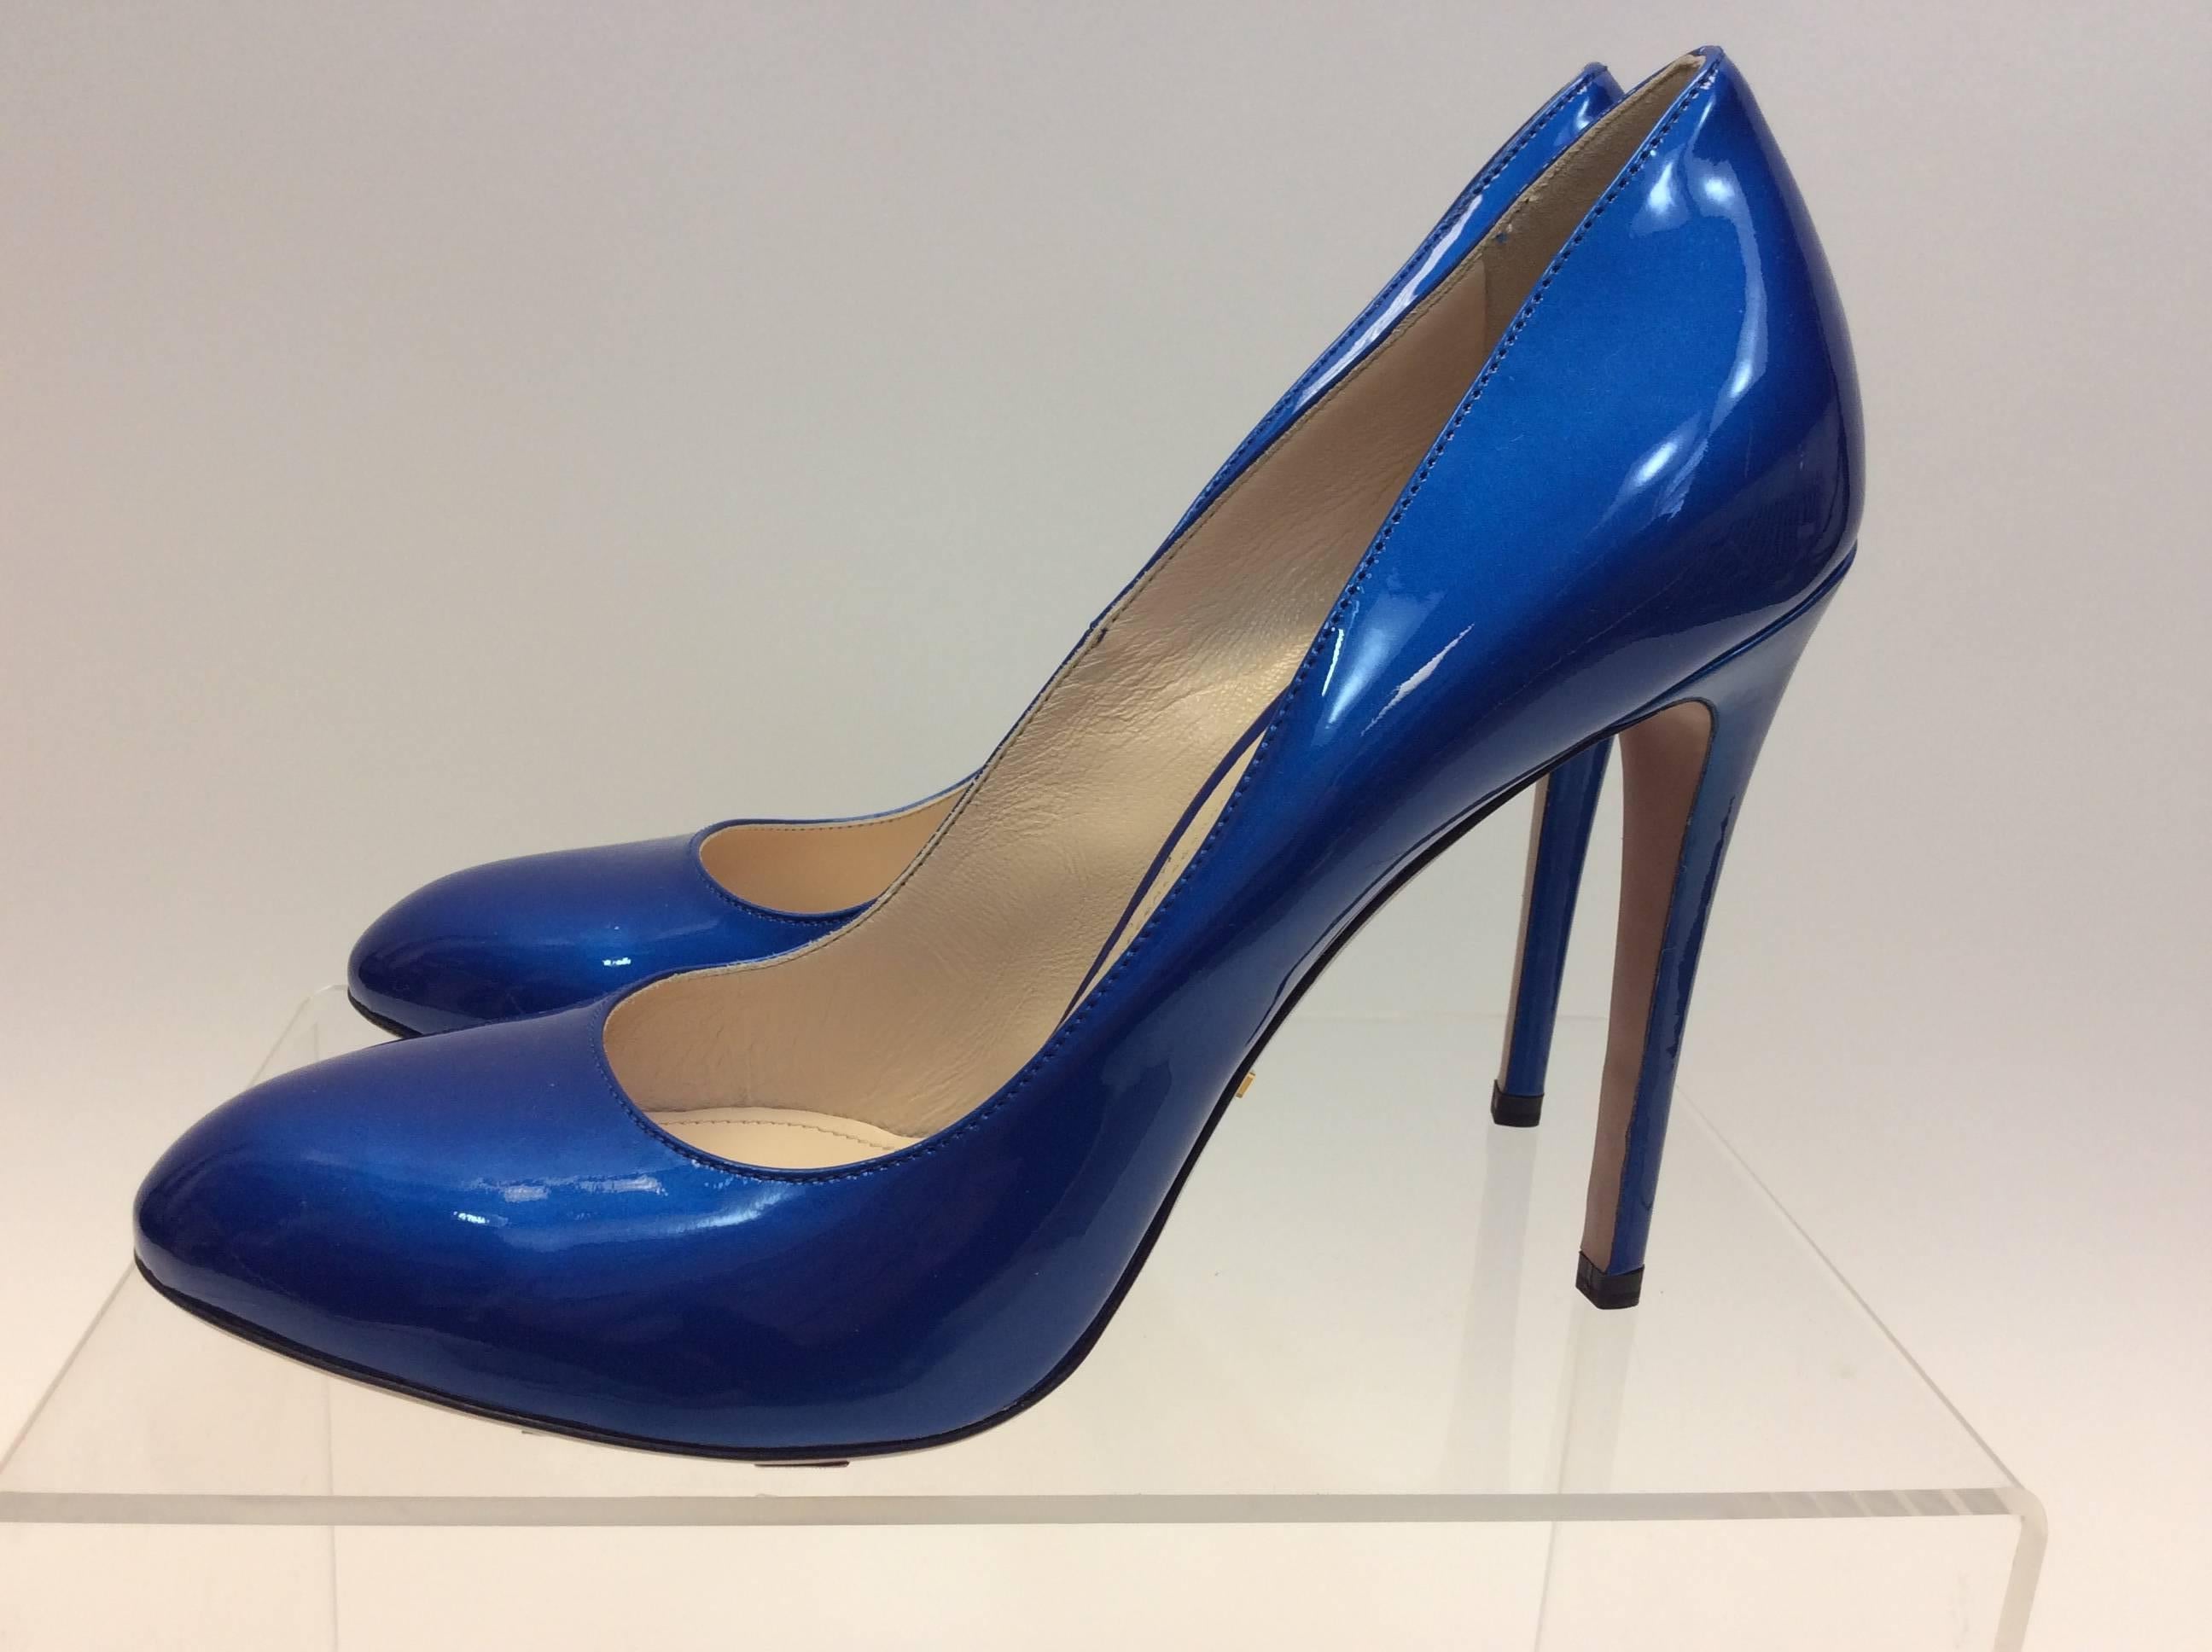 Prada Royal Blue Patent Leather Pump
Never worn
Comes with box
$399
Made in Italy
Size 39
4.5